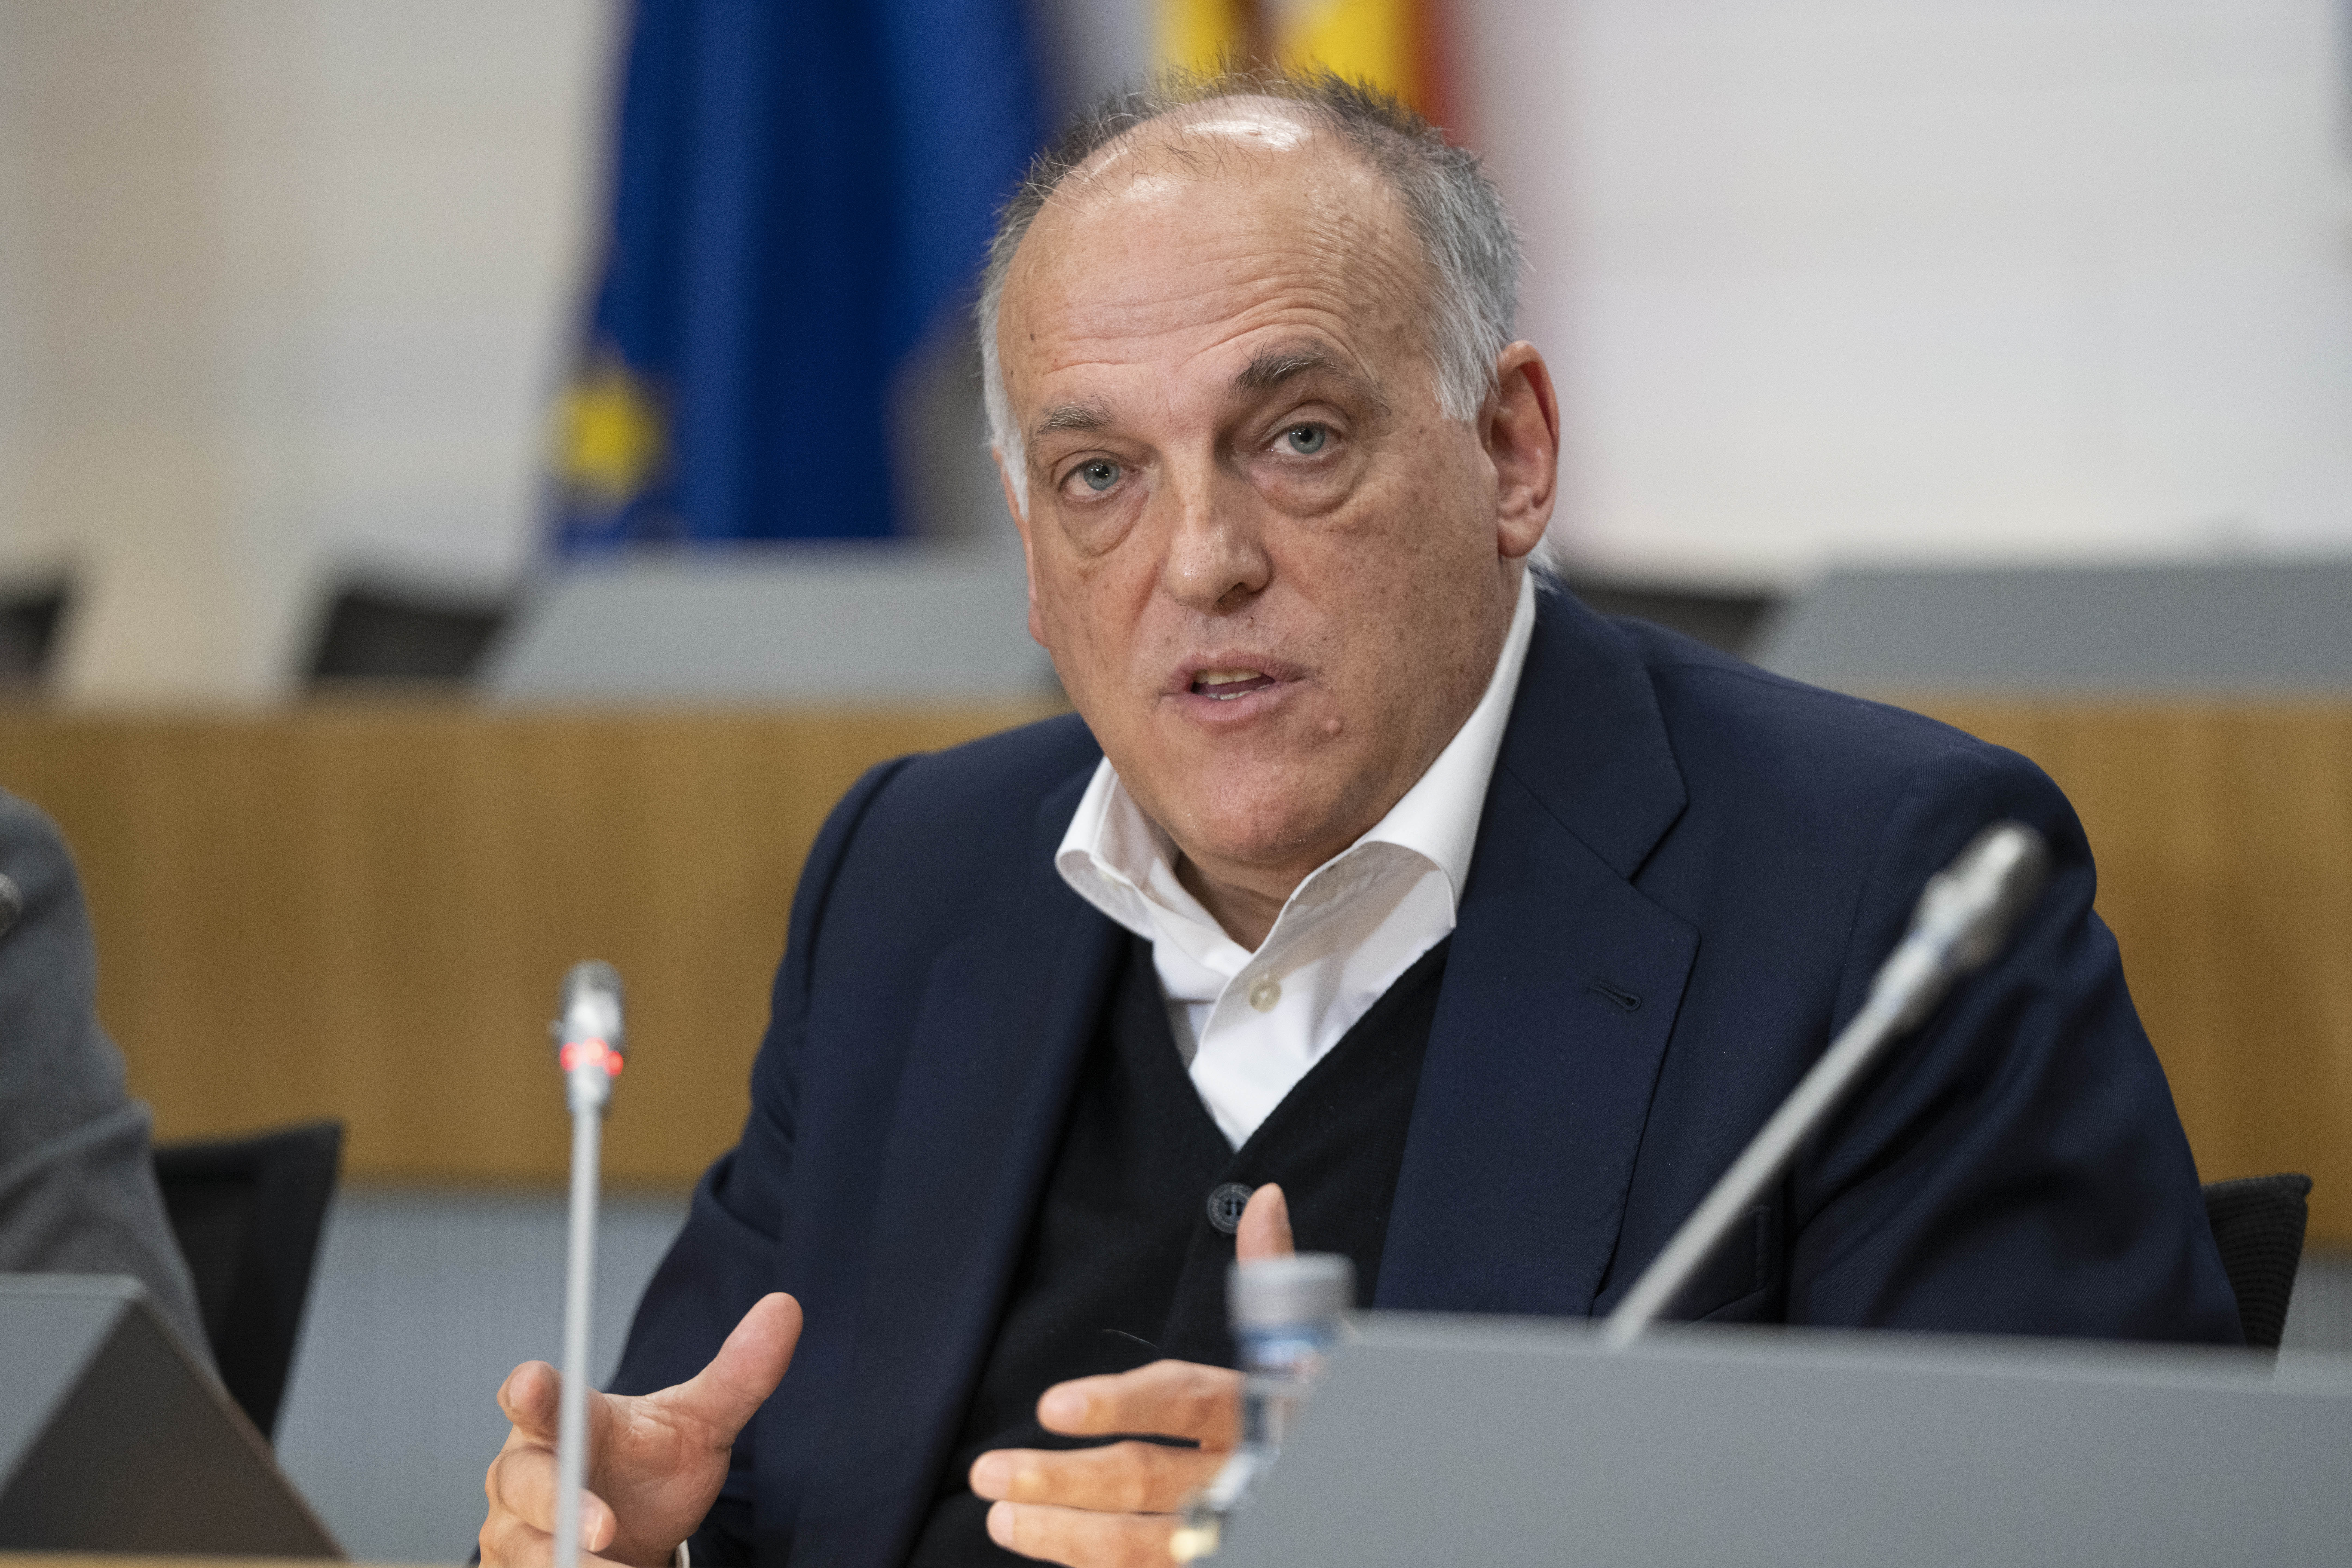 LaLiga says Super League would mean 55% revenue loss and 'destroy an industry'